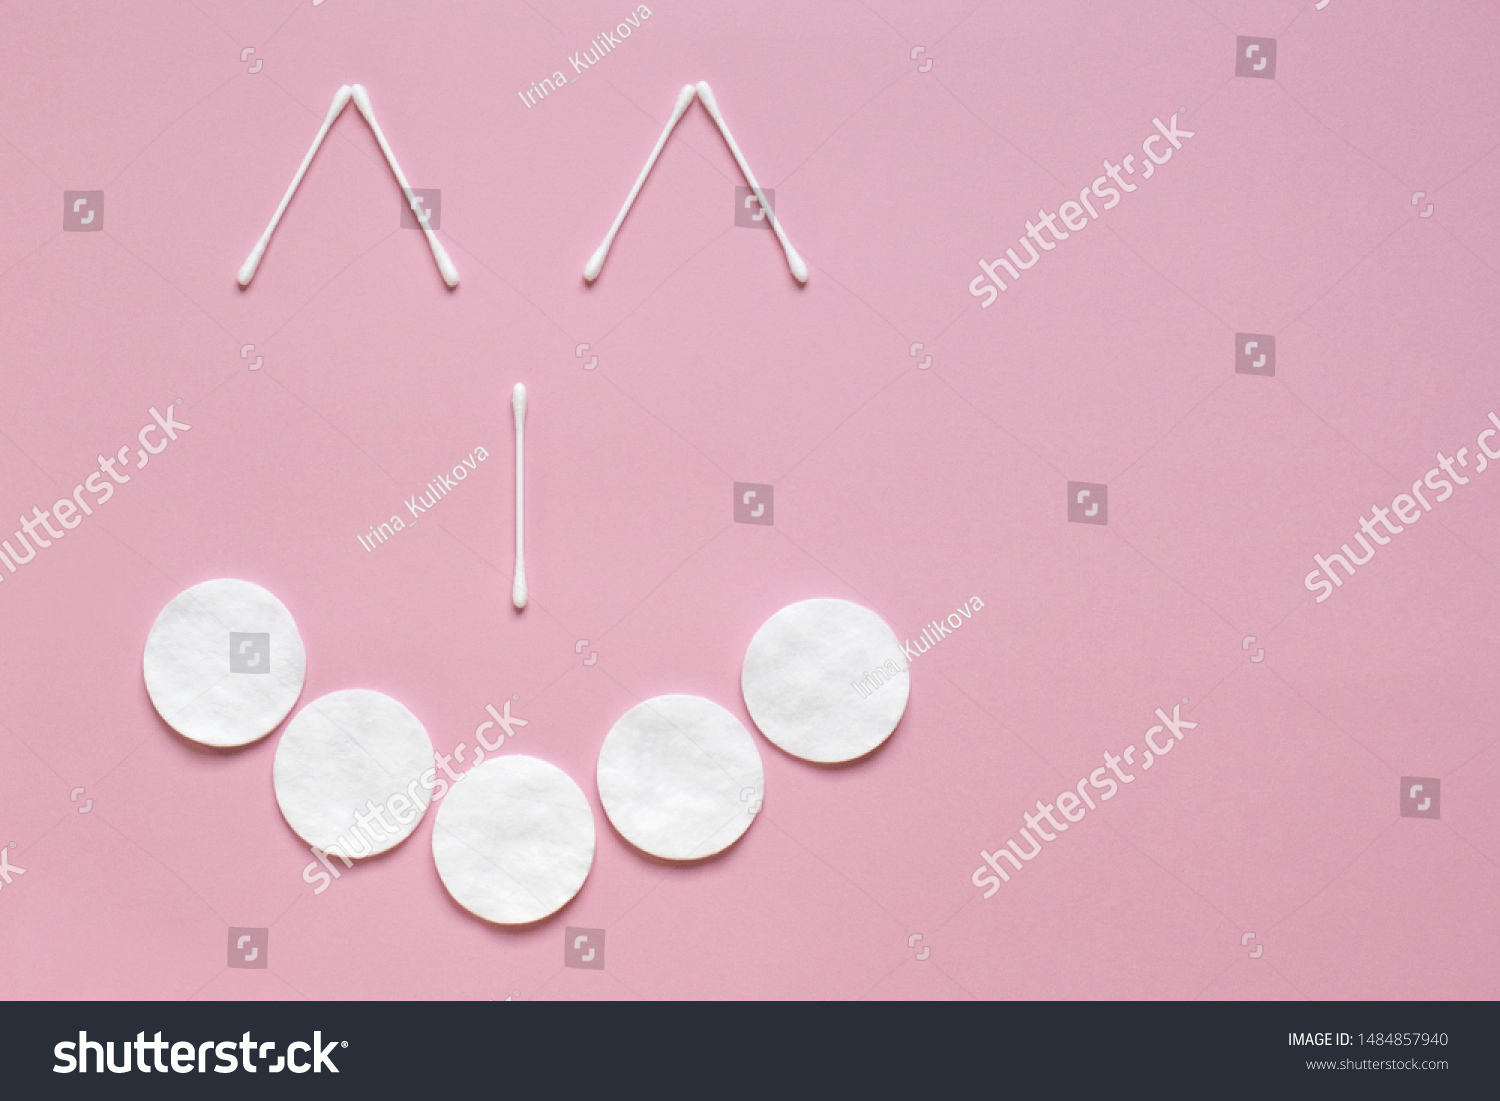 Flatlay white cotton buds for ears and cotton buds on a pink background with copy space. Sketchy funny image of a face with a smile. The concept of hygiene, medicine, health care, beauty #1484857940